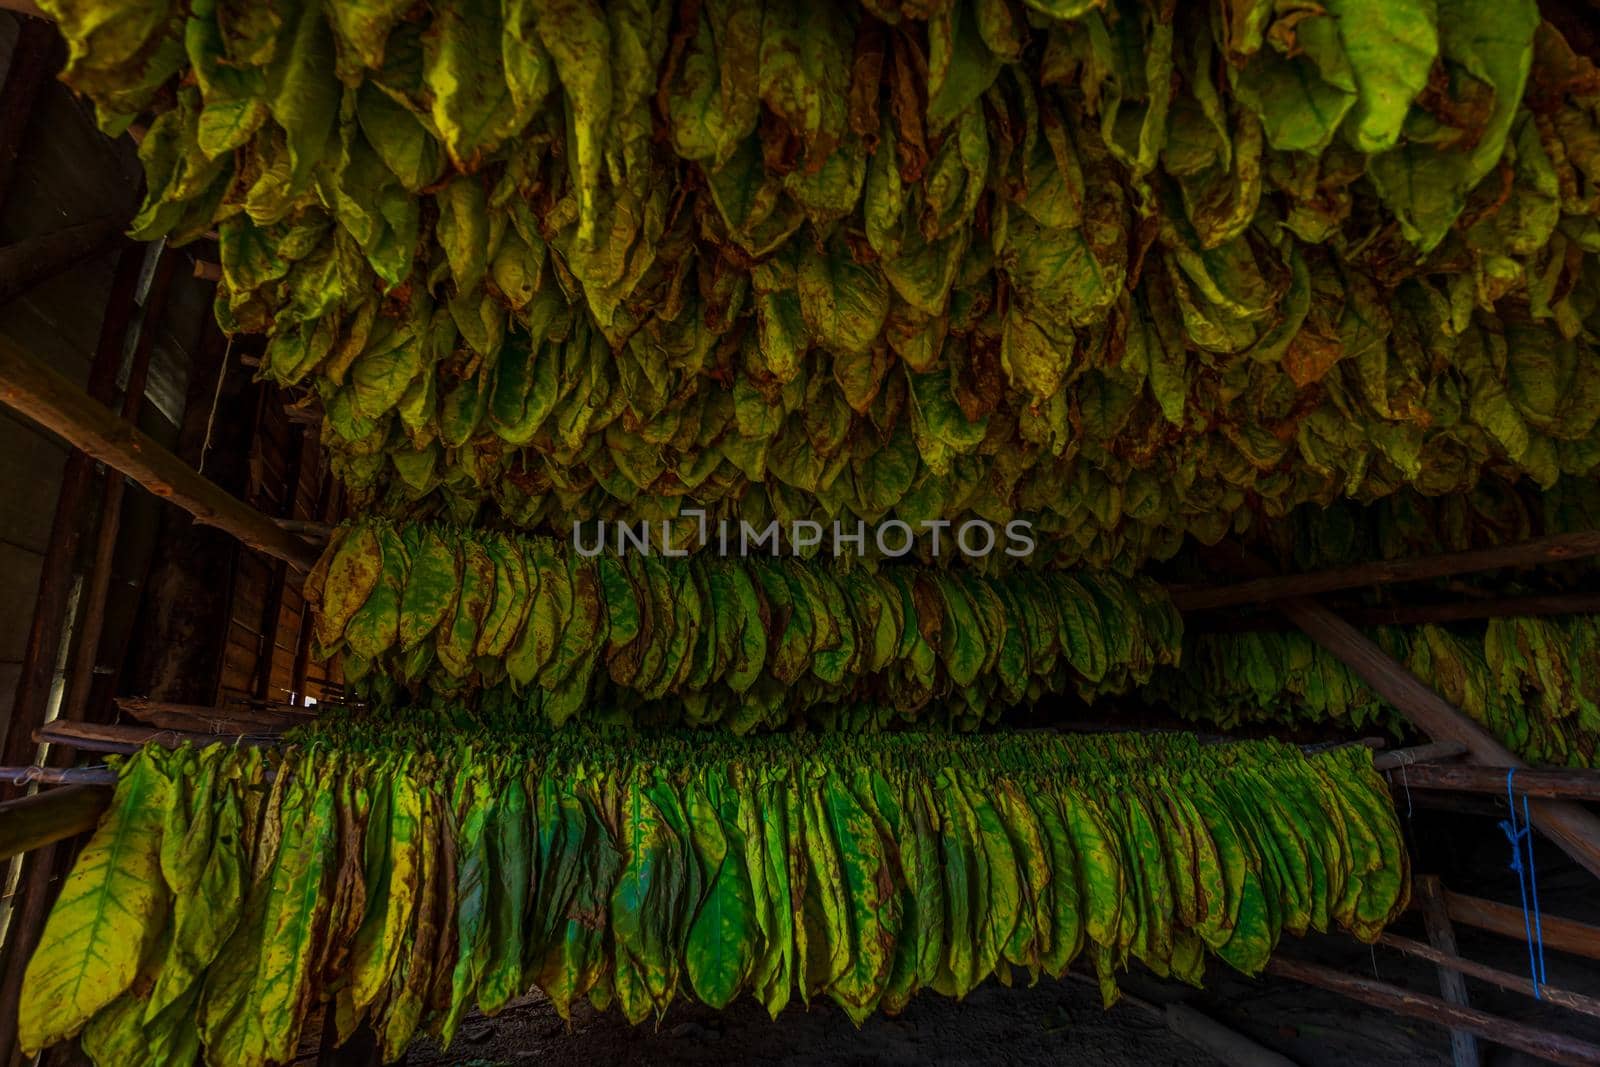 Tobacco leaves left hanging to dry inside a tobacco drying shed in Finca Montesino, Pinar del Rio, Cuba